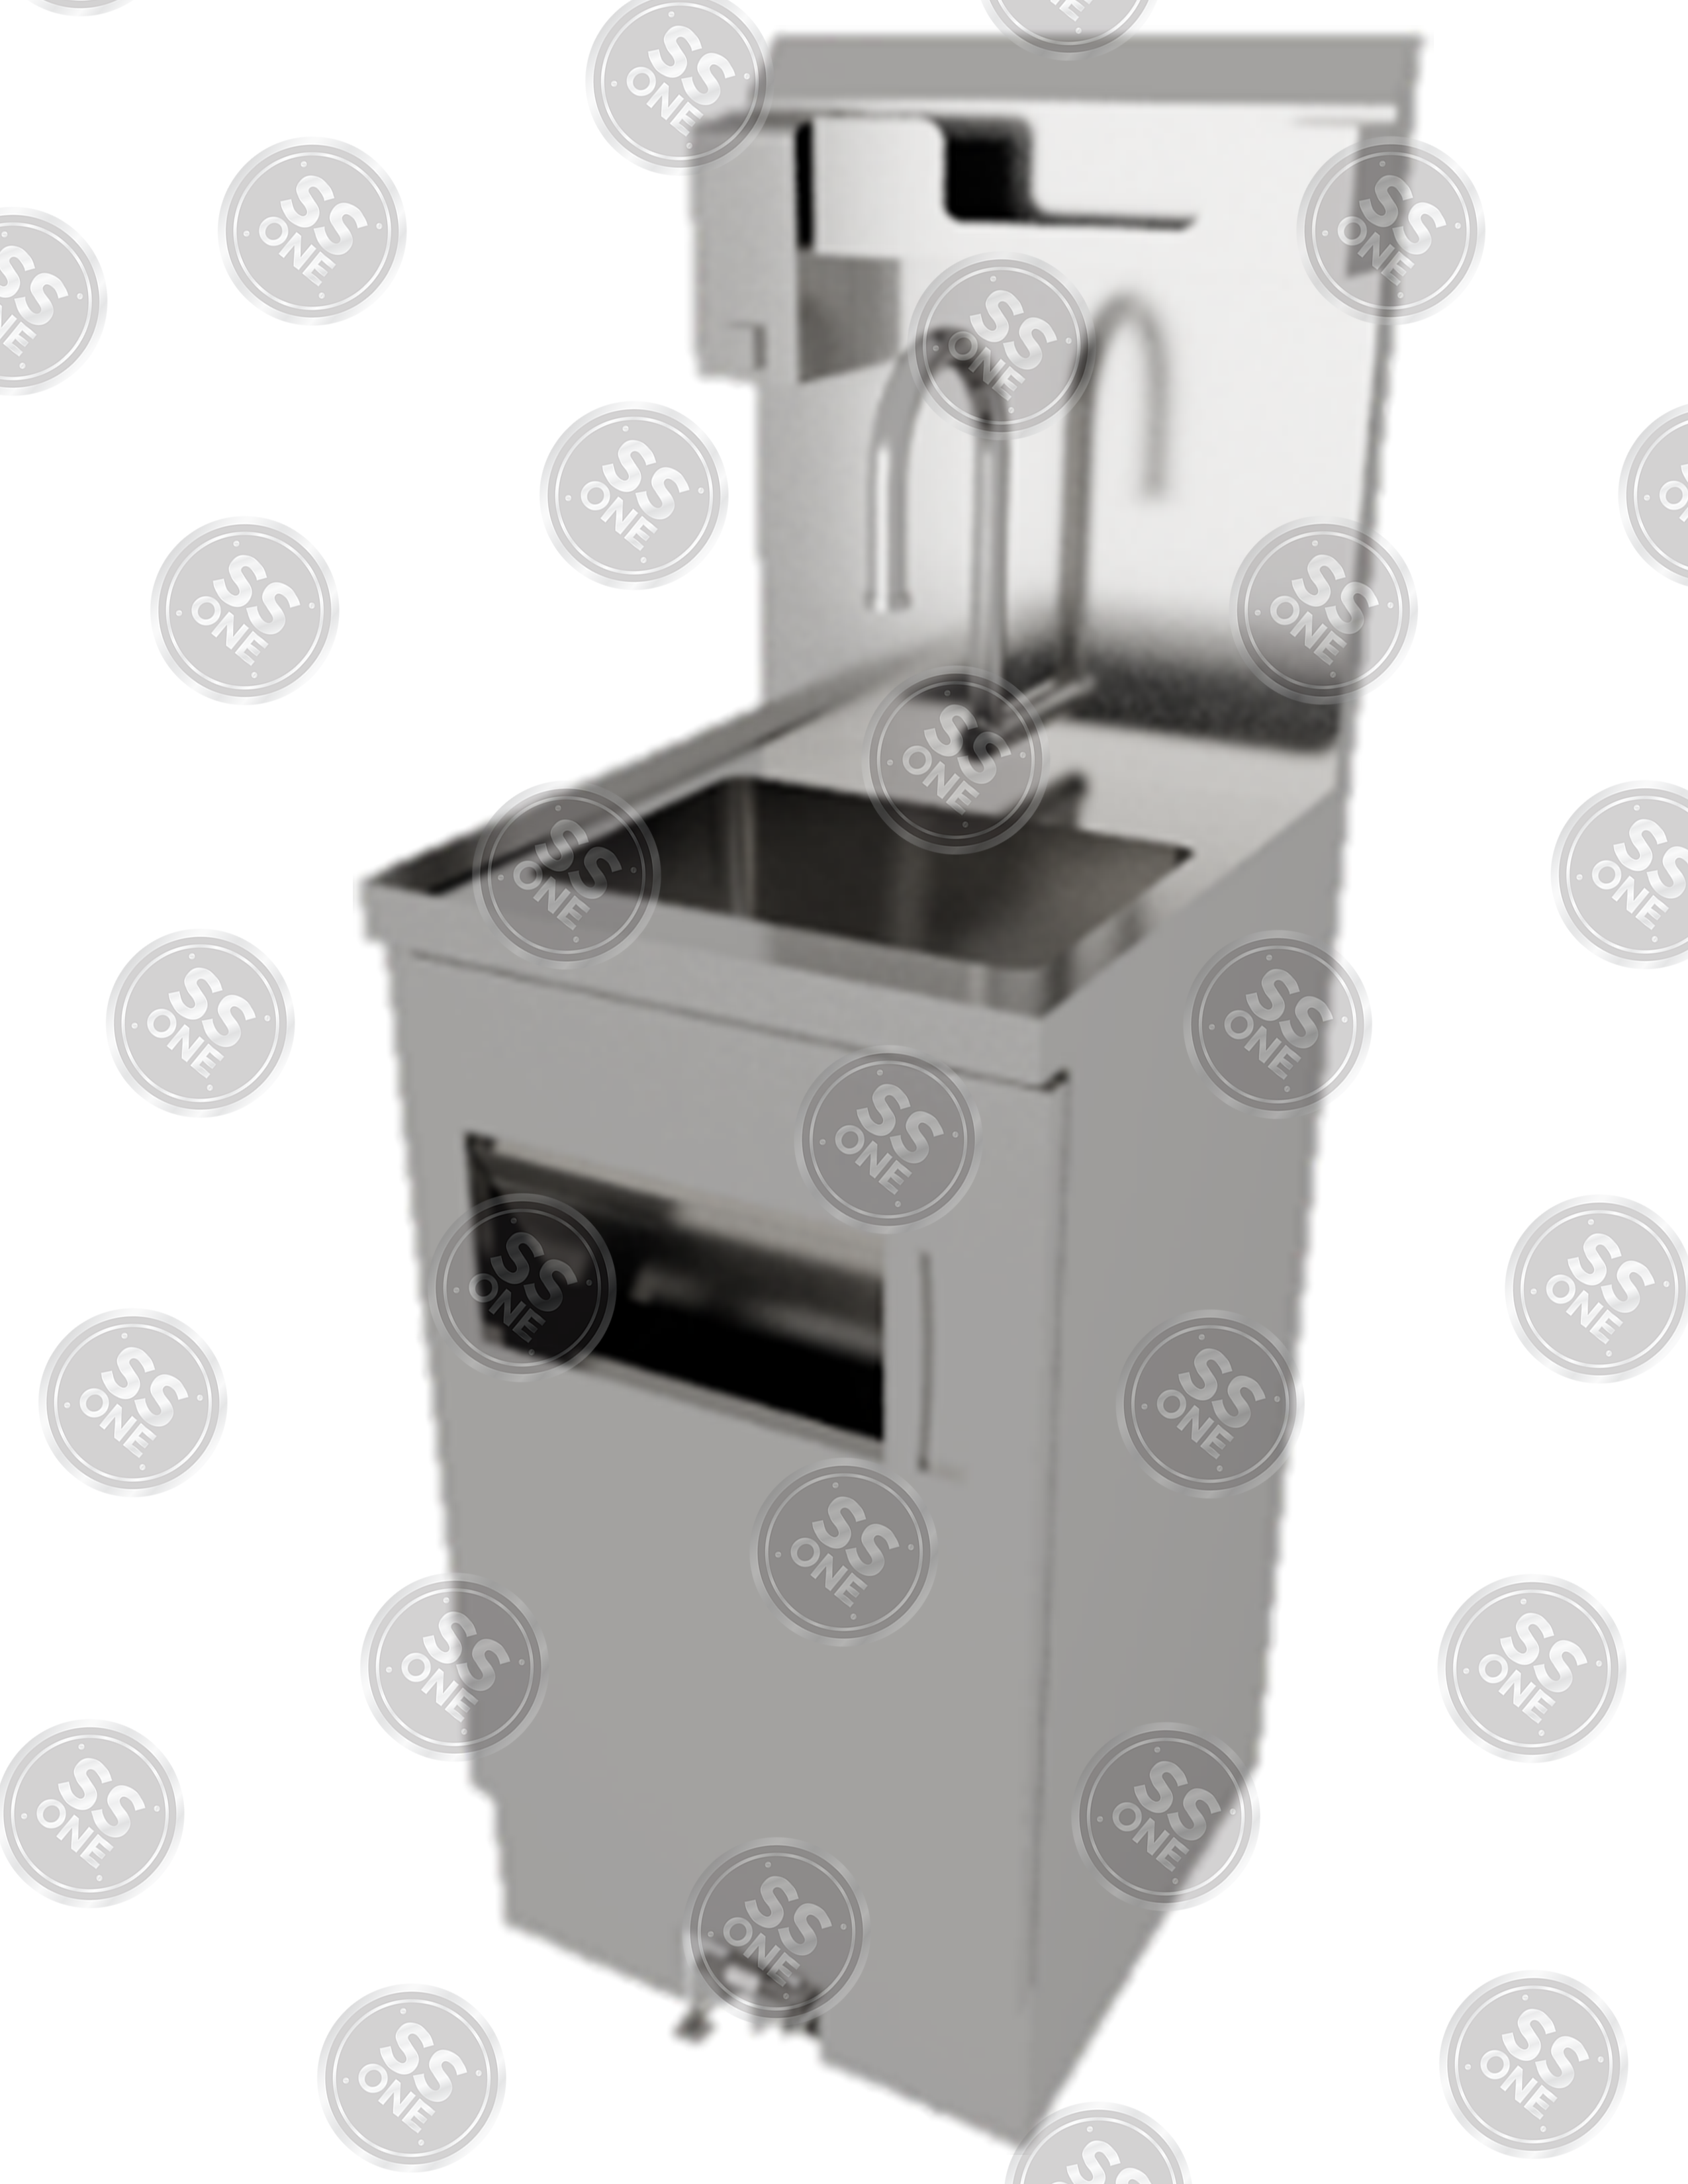 FOOT OPERATED HANDWASHING SINK (WITH SOAP AND TOWEL DISPENSER)